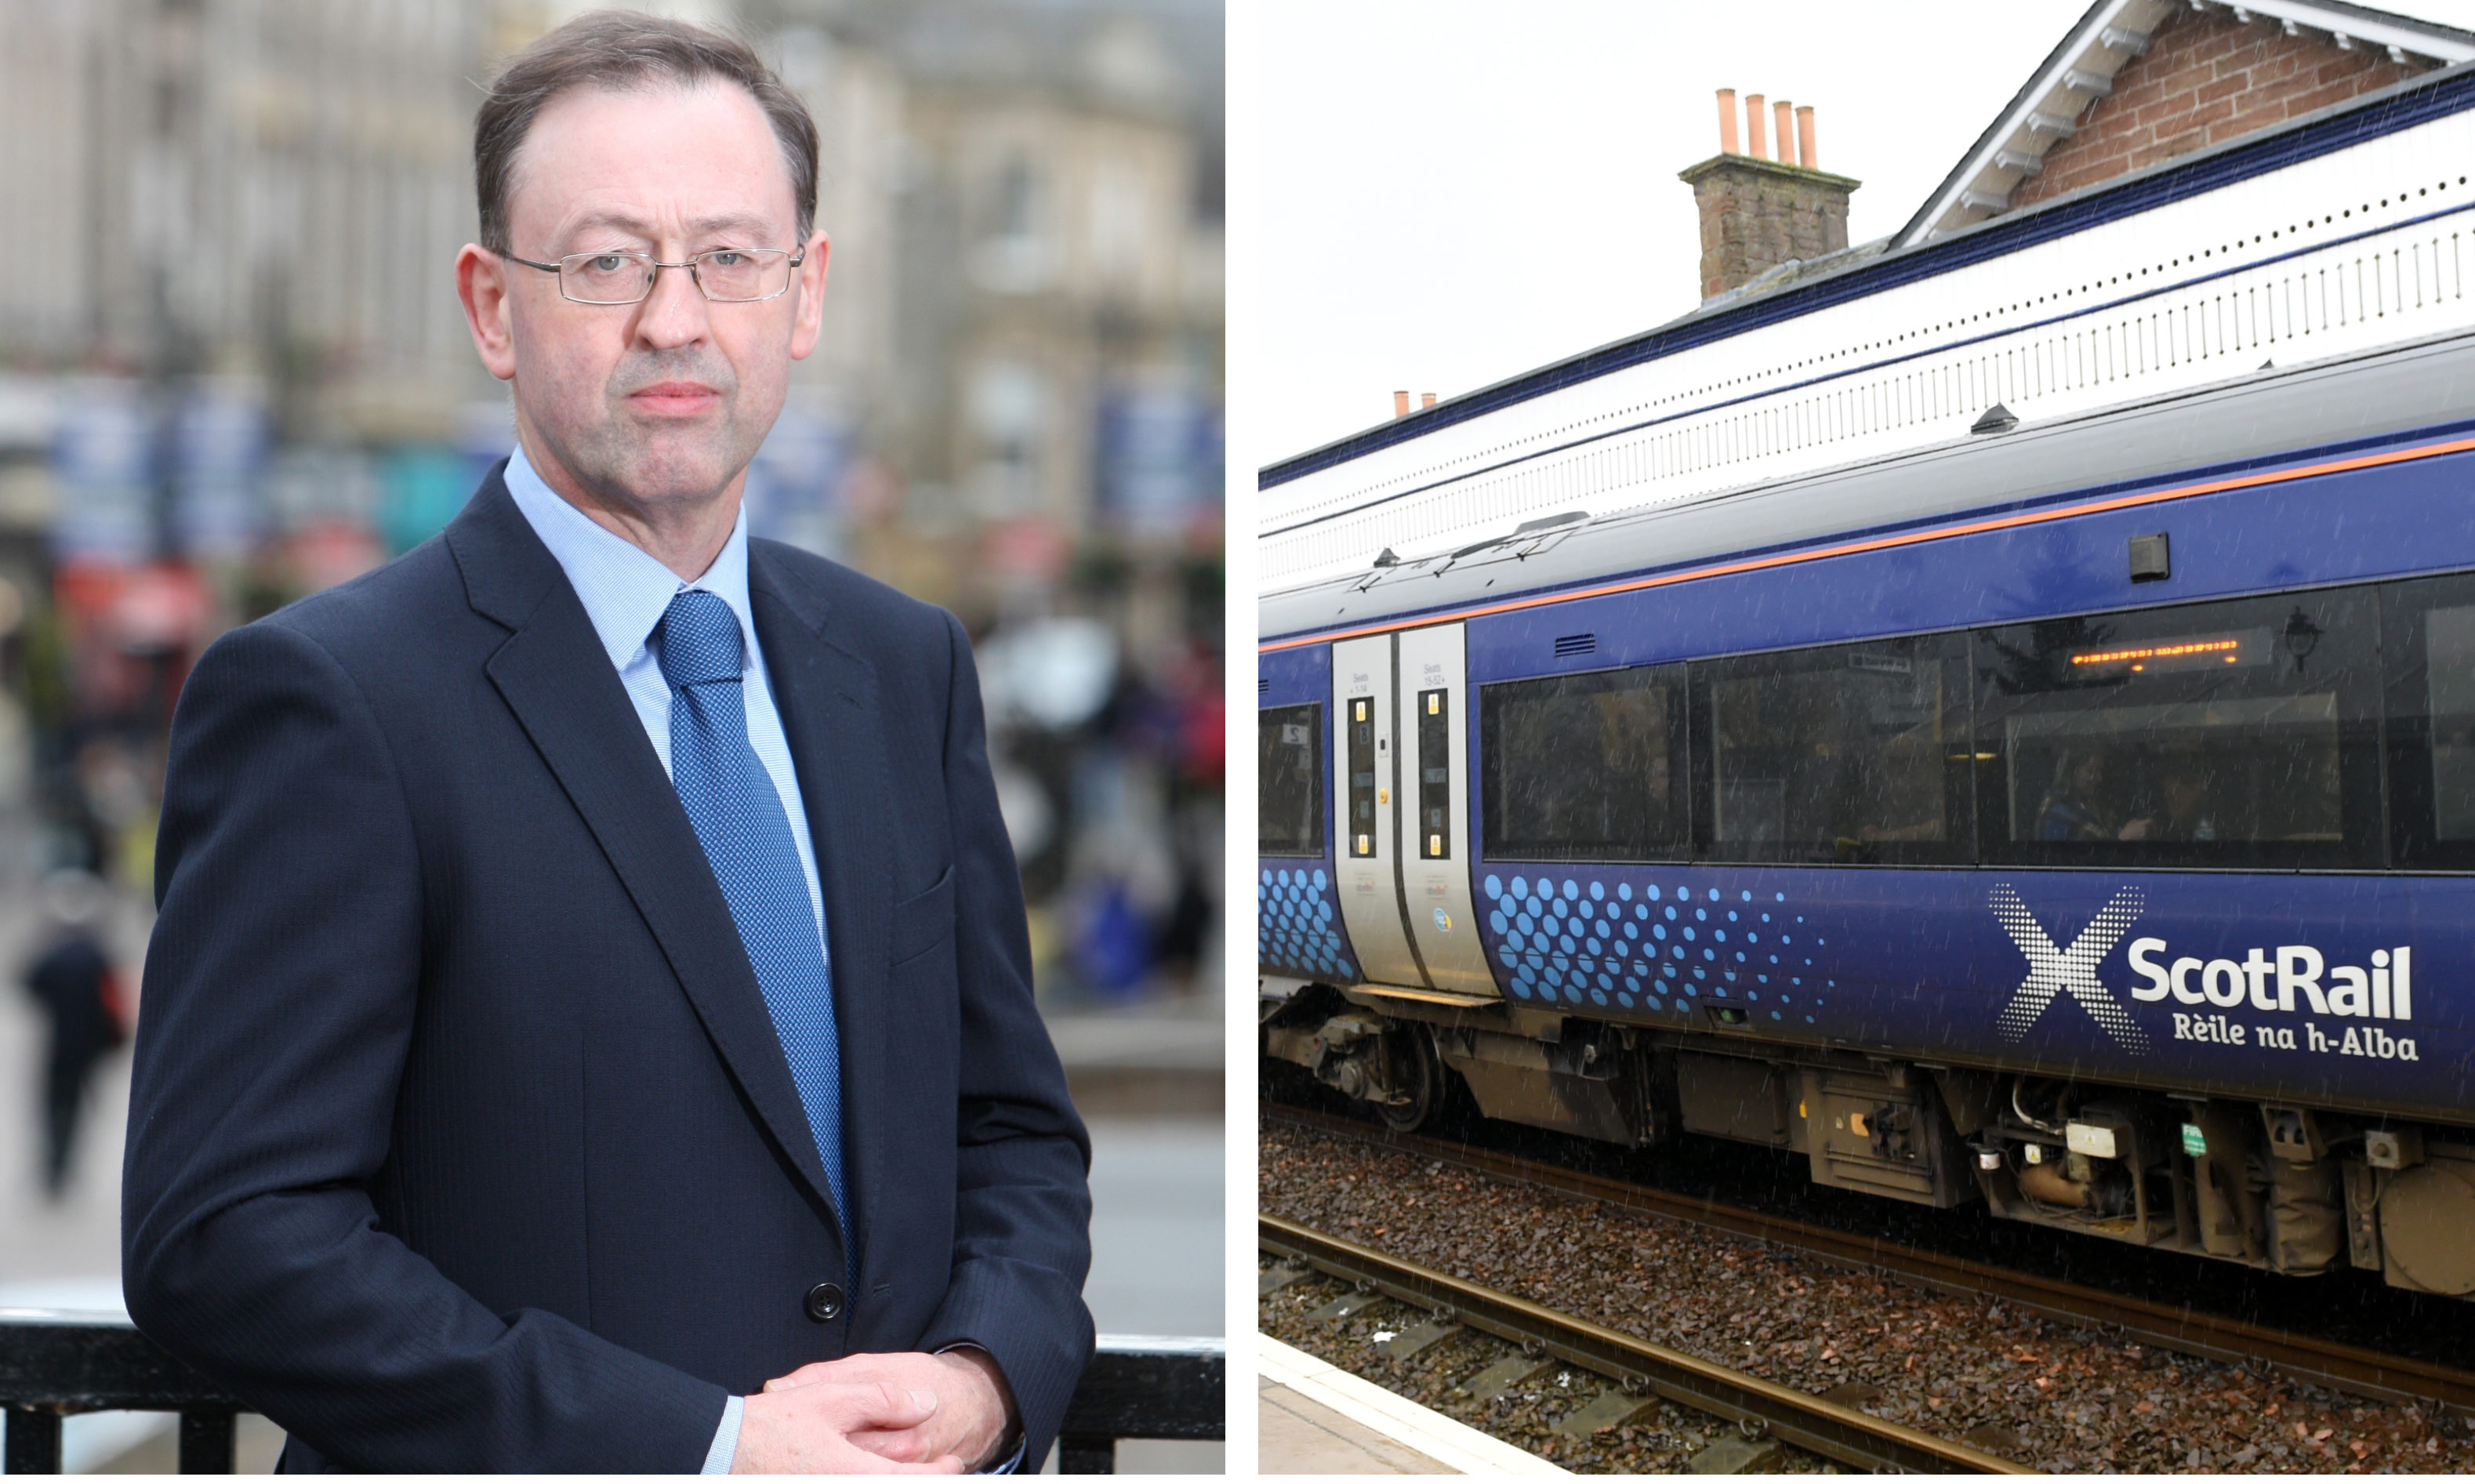 Stewart Nicol of Inverness Chamber of Commerce has hit out at ScotRail